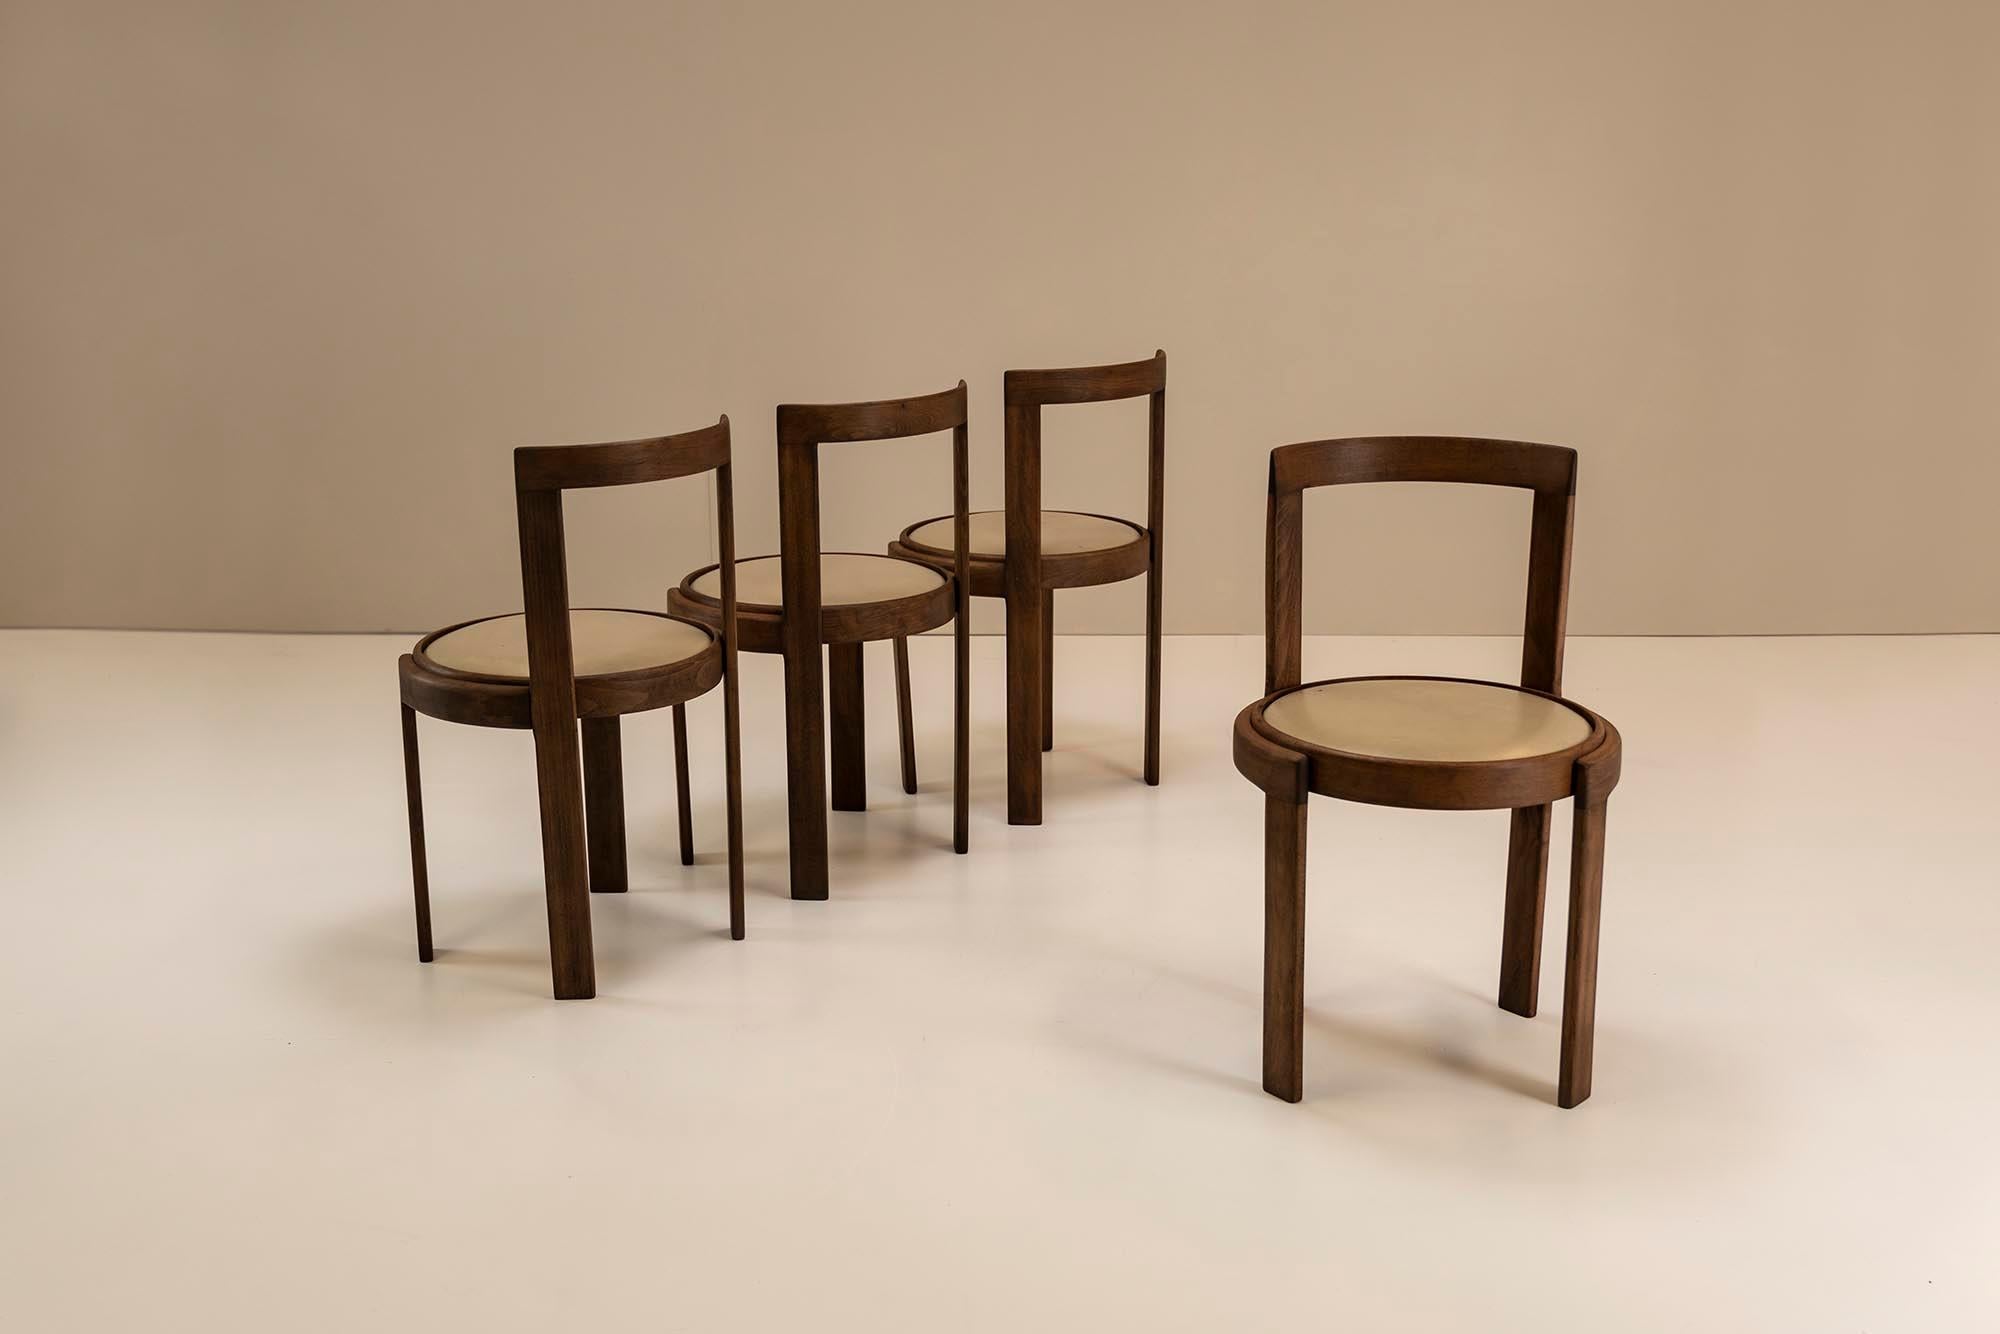 Mid-20th Century Italian Modernist Dining Chairs in Ash Wood and Faux Leather, 1960s For Sale